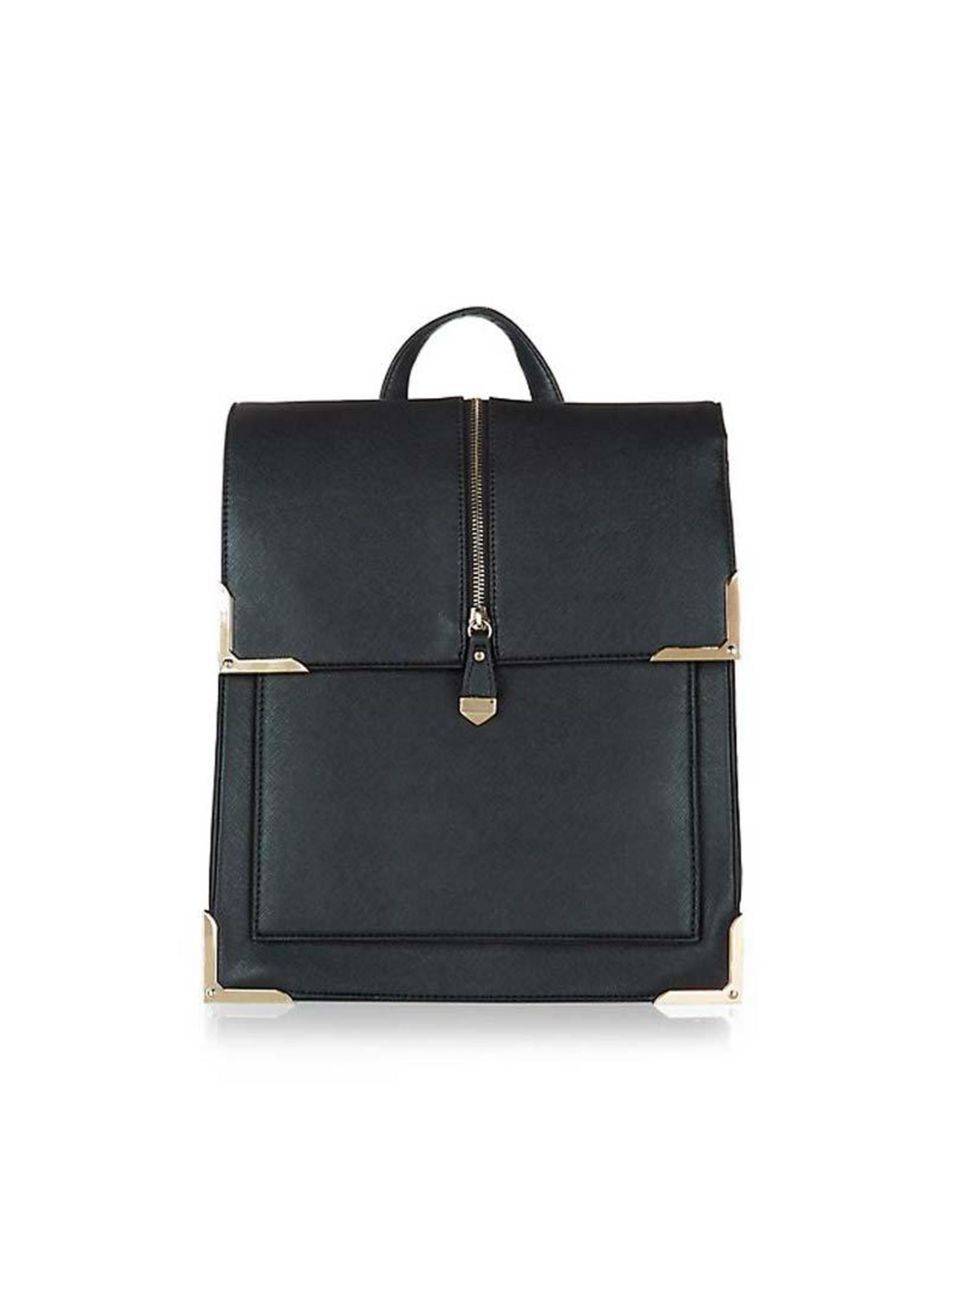 <p>Beauty Assistant Joely Walker fell for this elegant little rucksack.</p>

<p> </p>

<p><a href="http://www.newlook.com/shop/womens/bags-and-purses/black-box-zip-front-metal-trim-backpack_320400001" target="_blank">New Look</a> rucksack, £22.99</p>